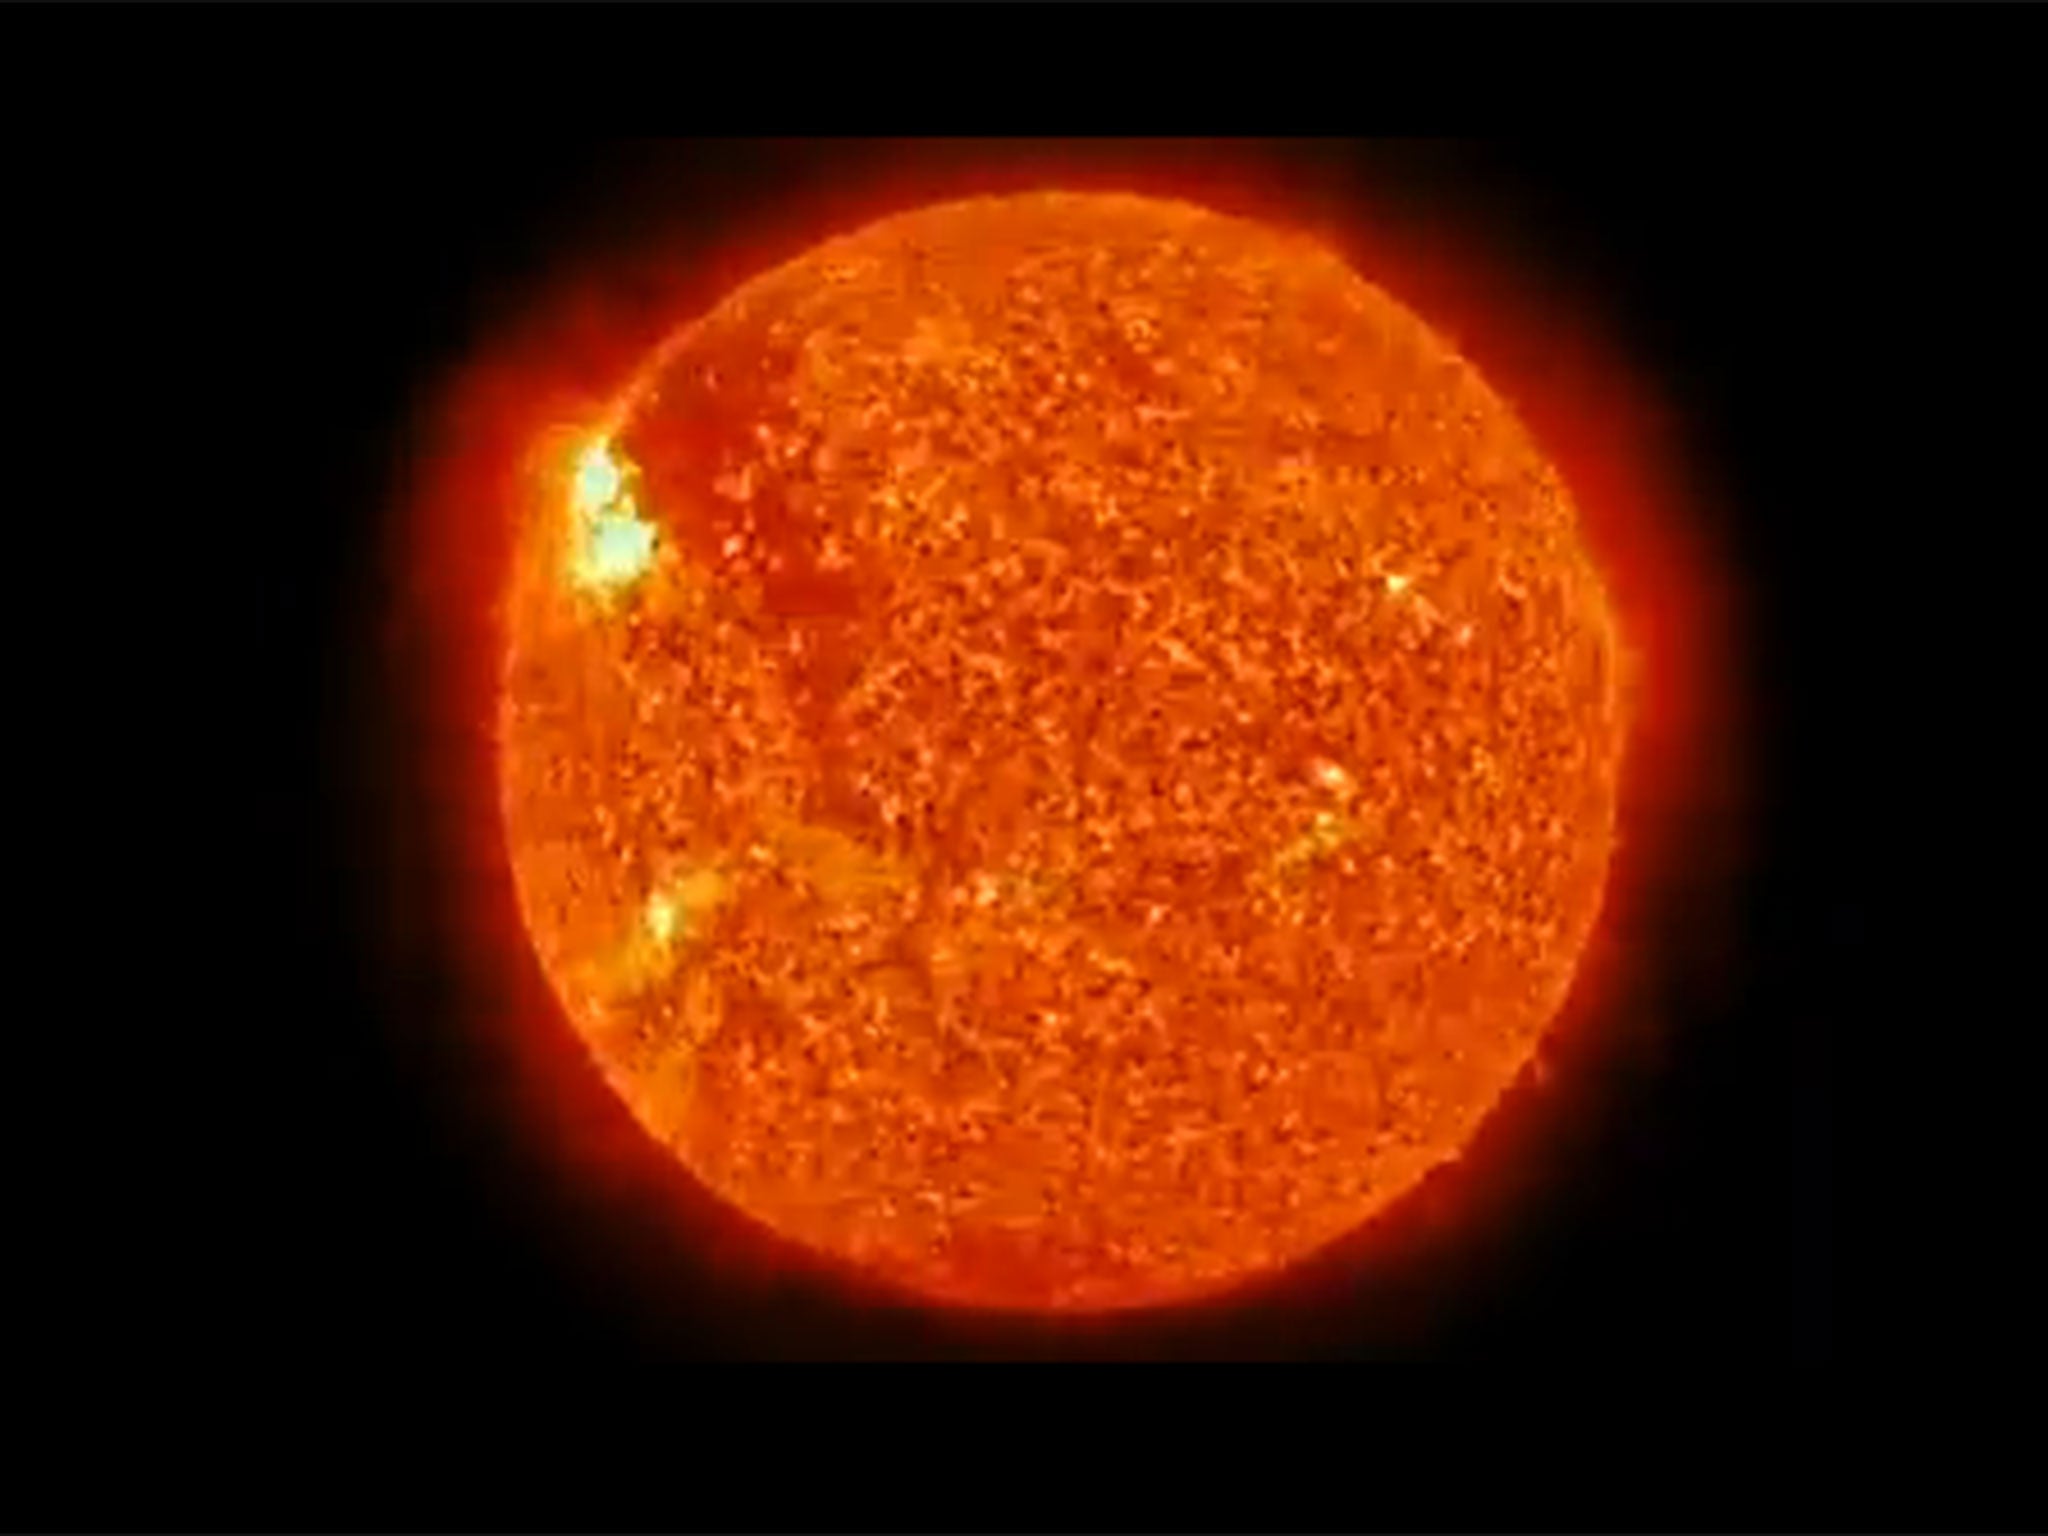 The SDO was launched in 2001 and has since provided scientists with crucial images and data on the variability of the Sun's surface